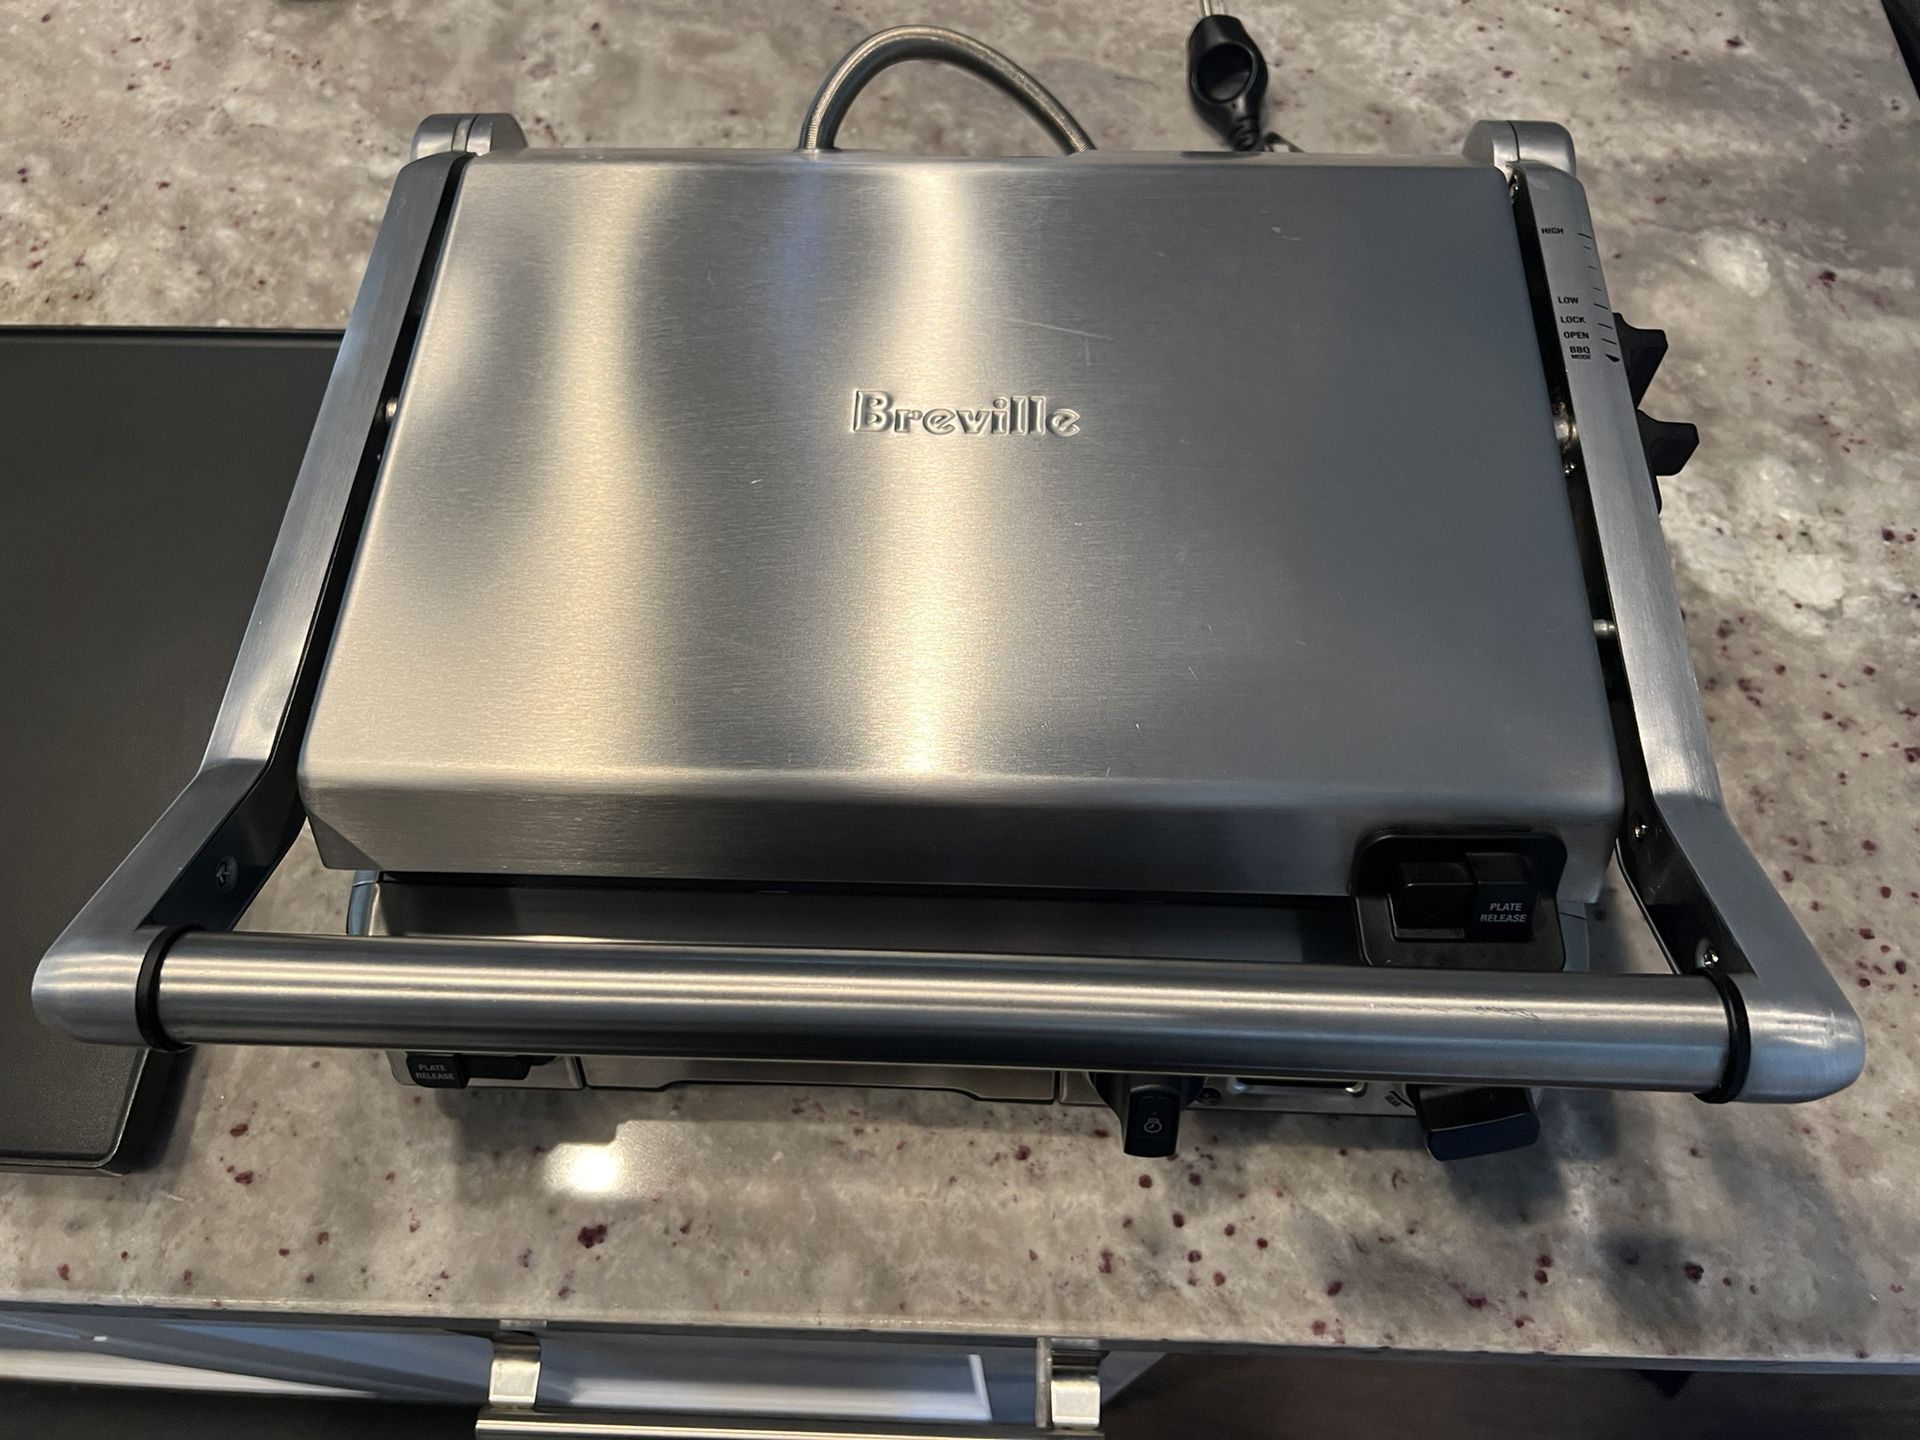  Breville BGR820XL Smart Grill, Electric Countertop